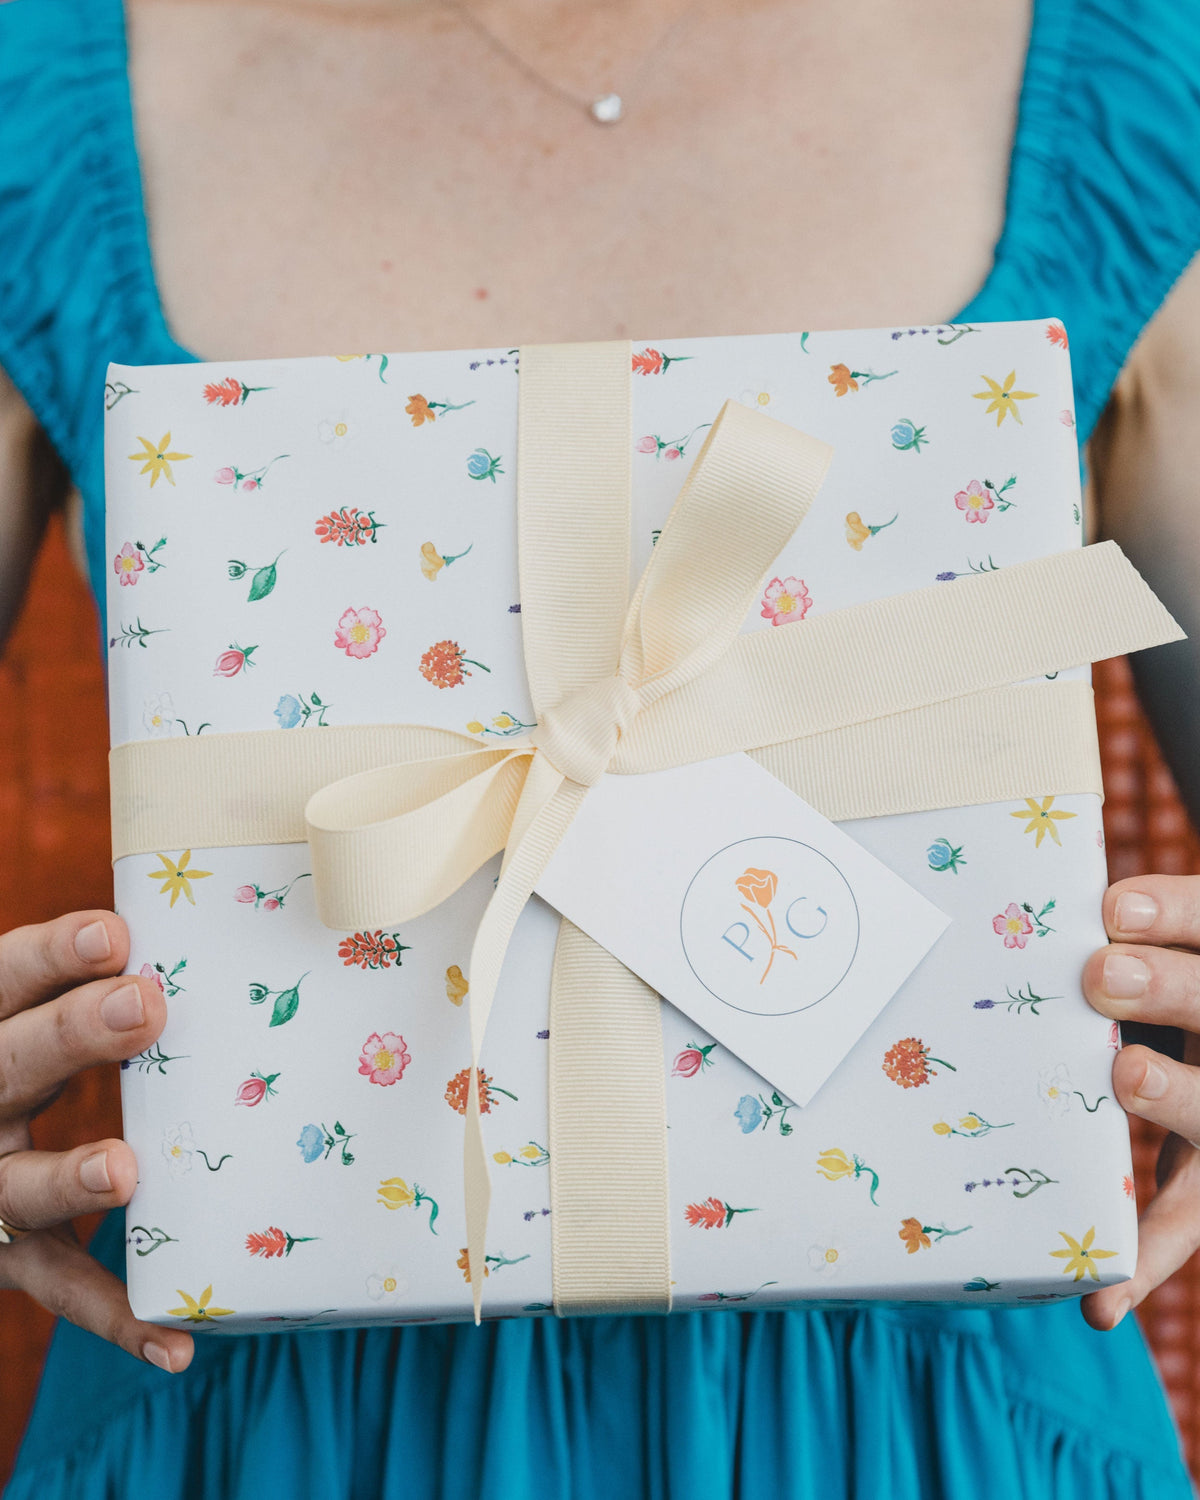 The Gifting Service Subscription